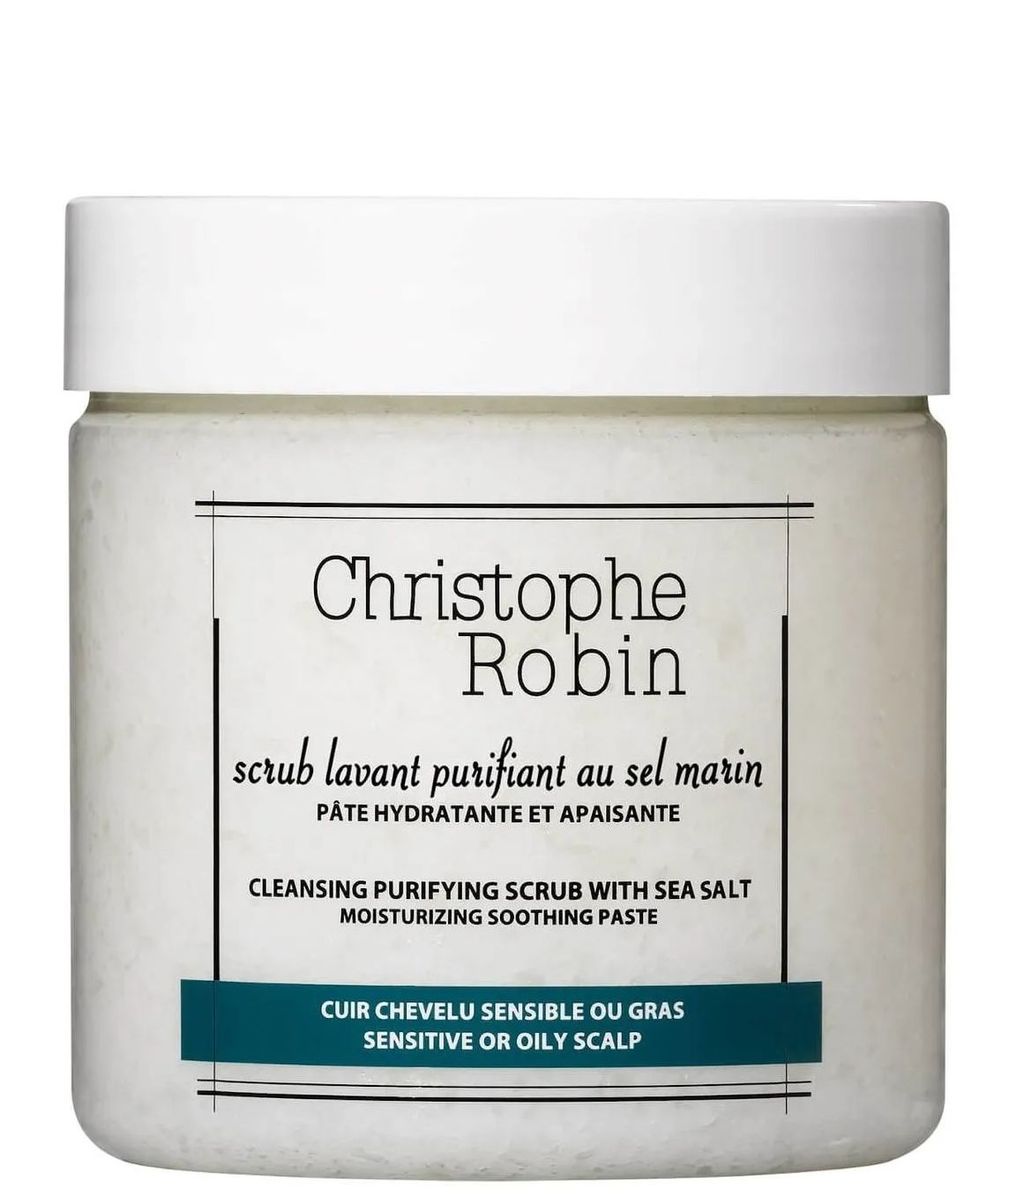 Cleansing Purifying Scrub with Sea Salt de Christophe Robin